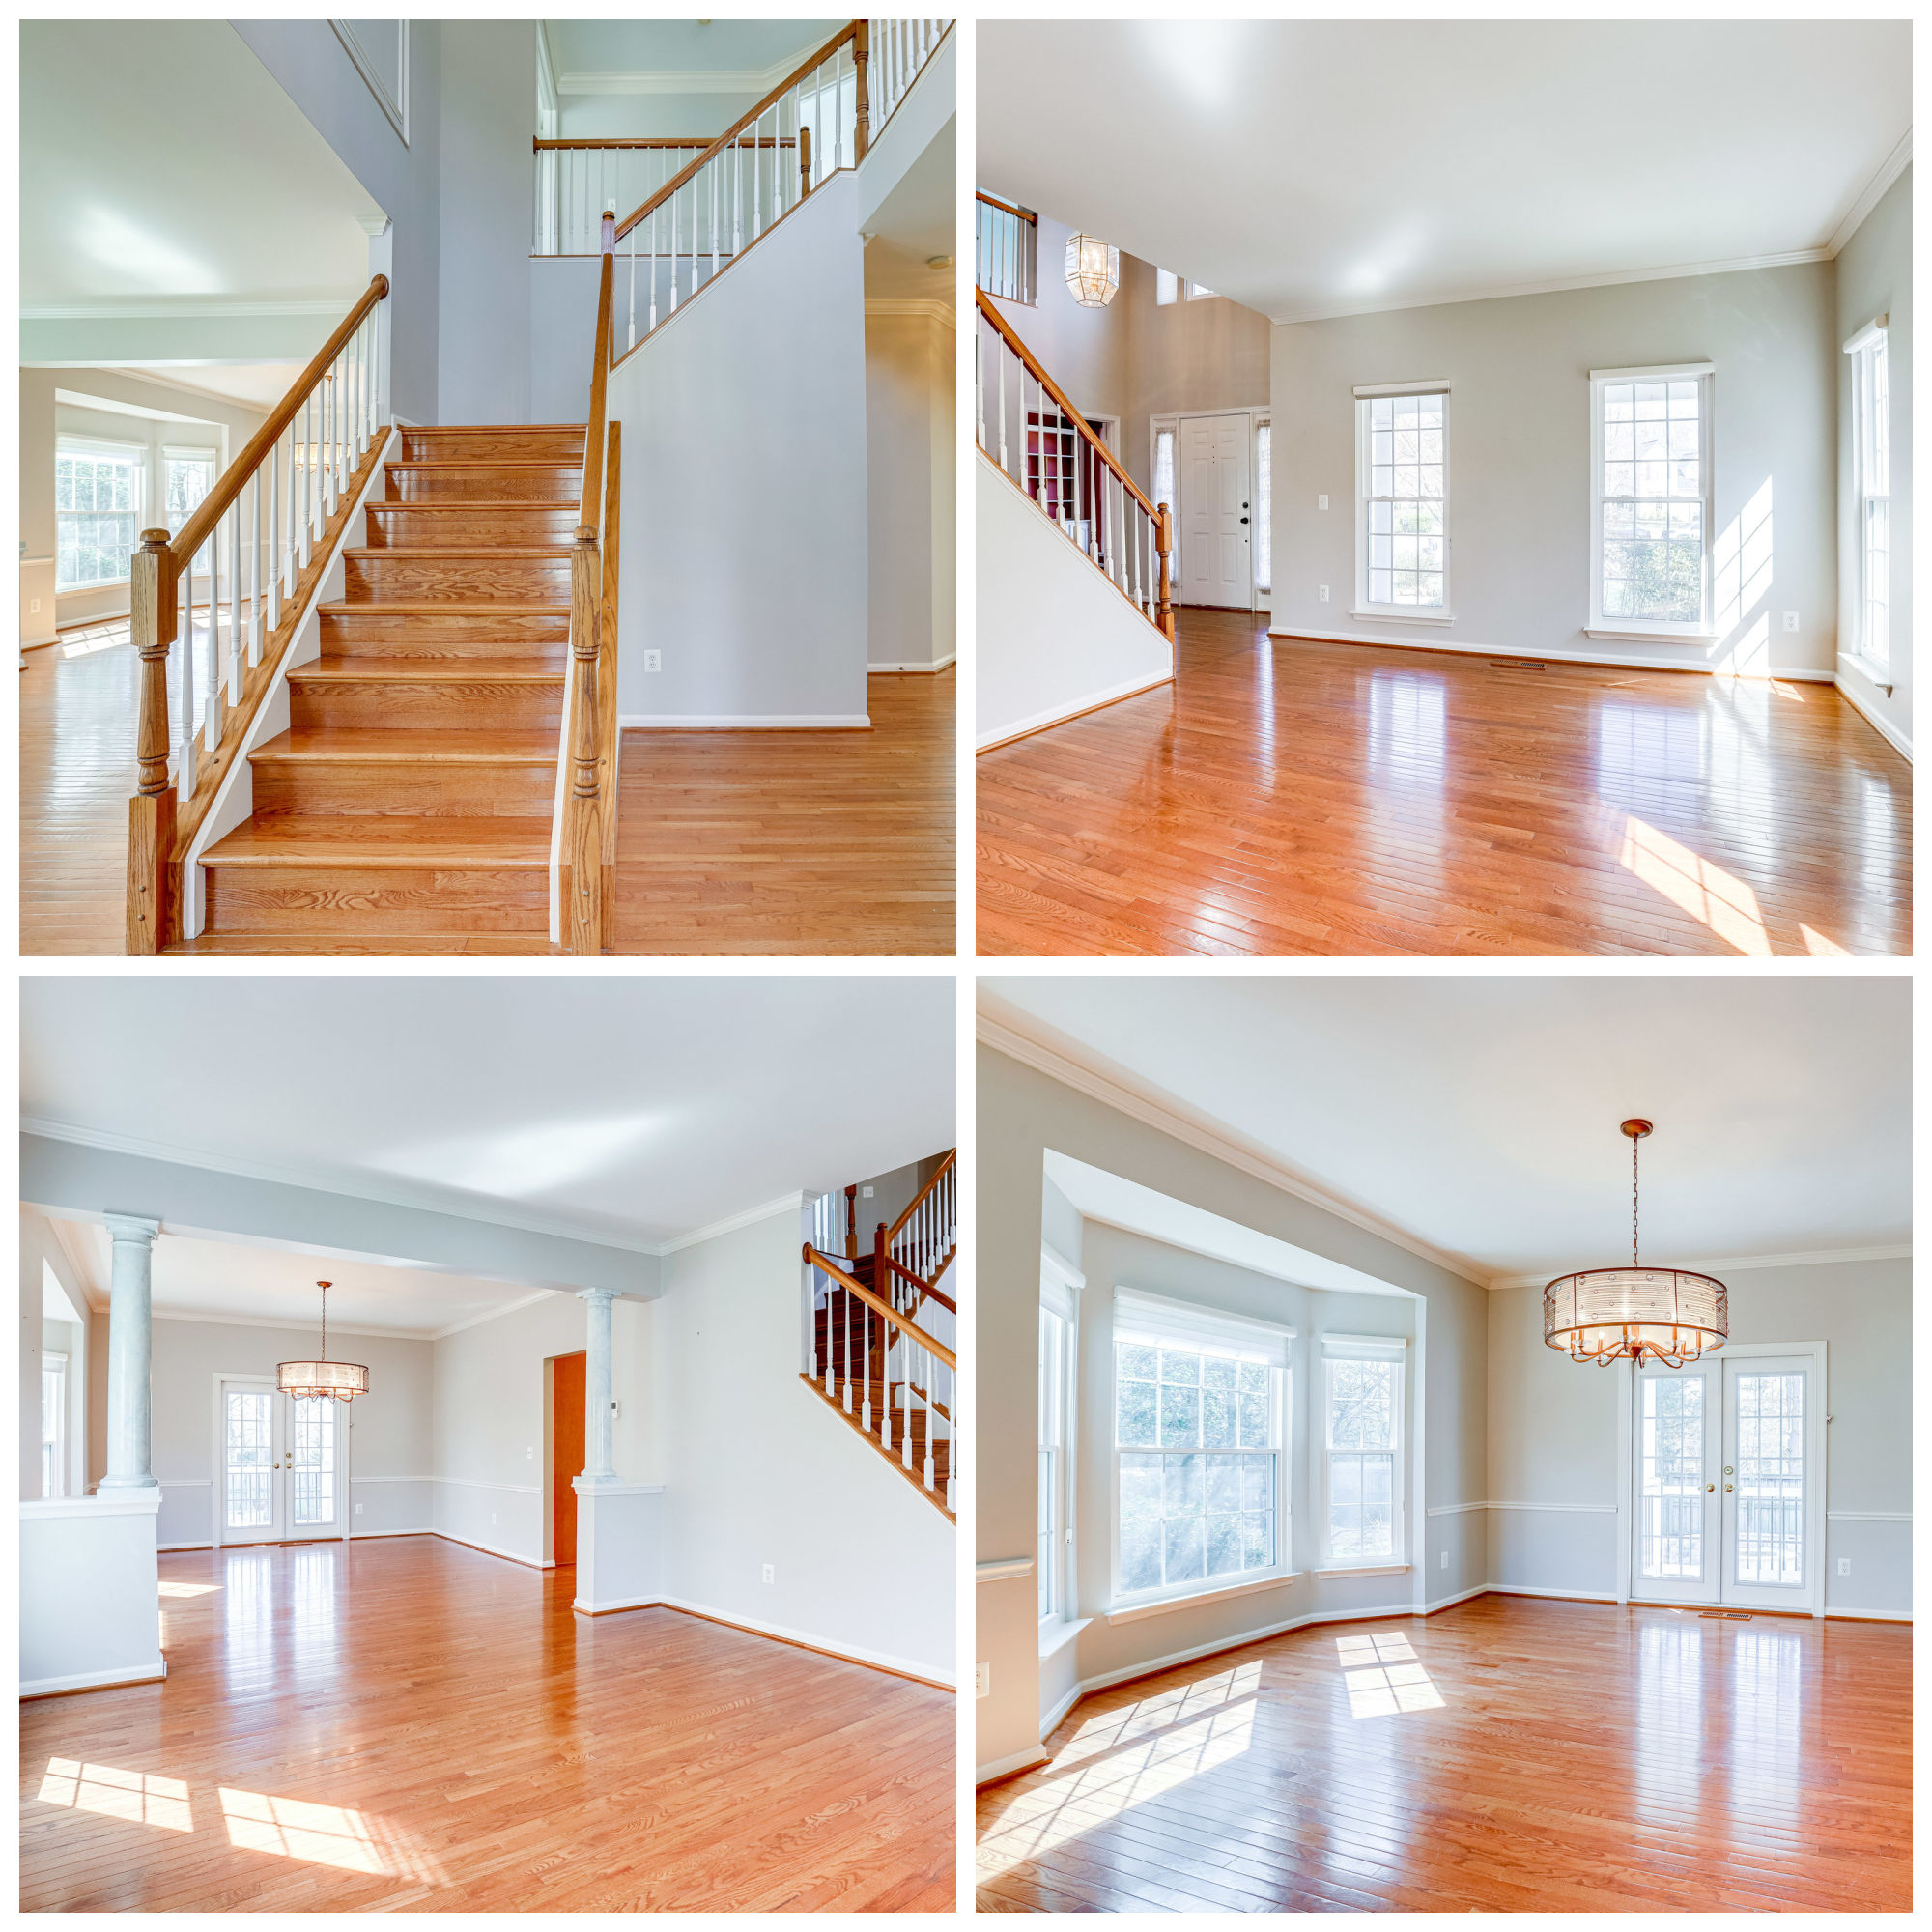 43123 Arundell Ct, Broadlands- Foyer, Living, and Dining Room